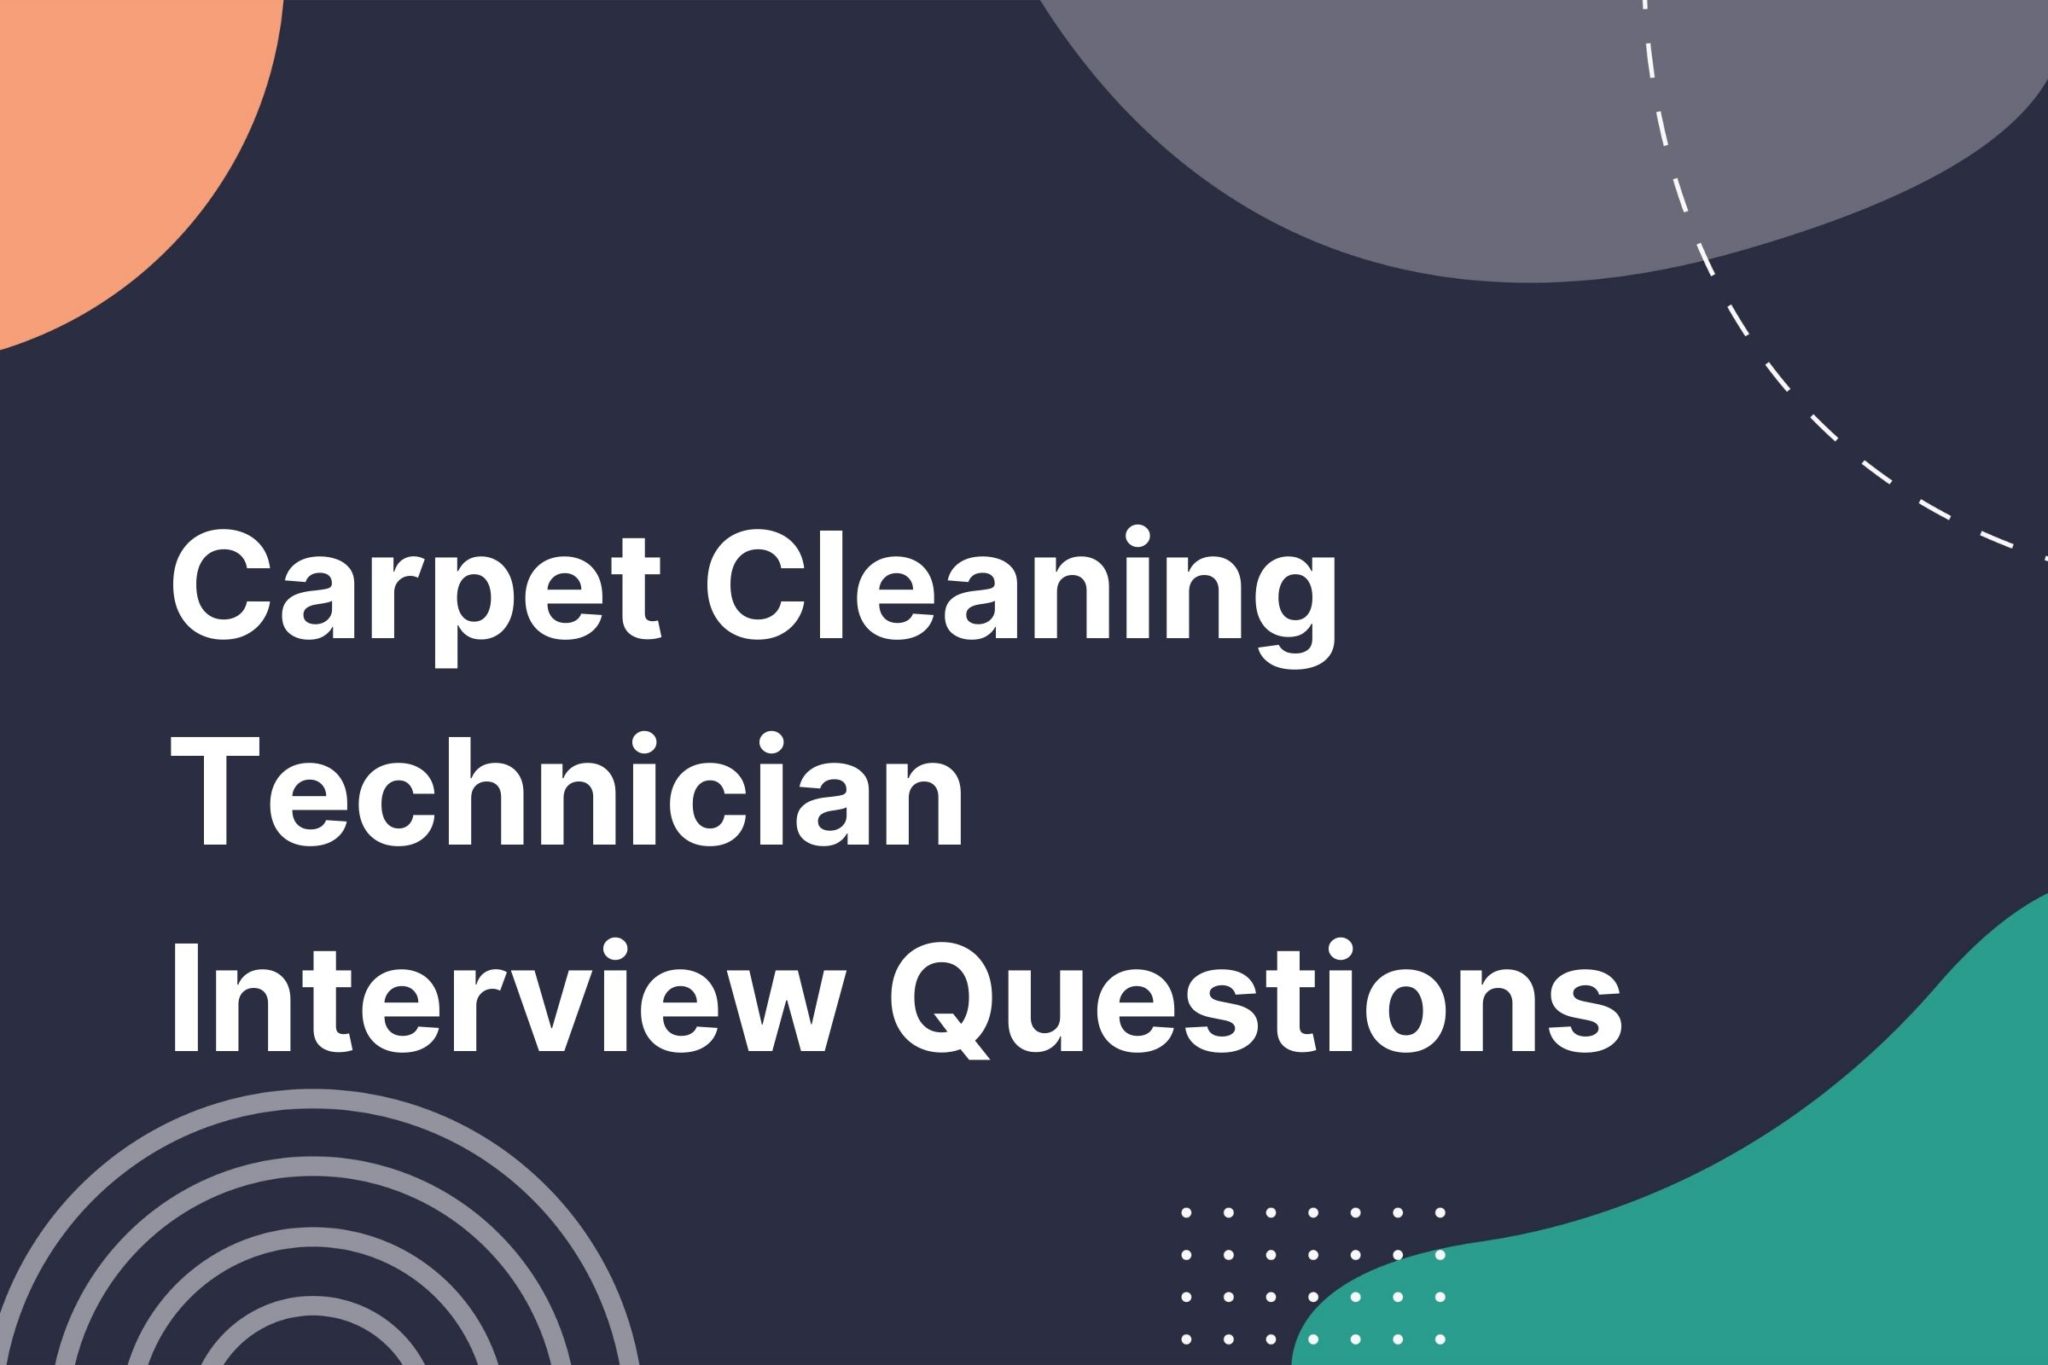 Carpet Cleaning Technician Interview Questions